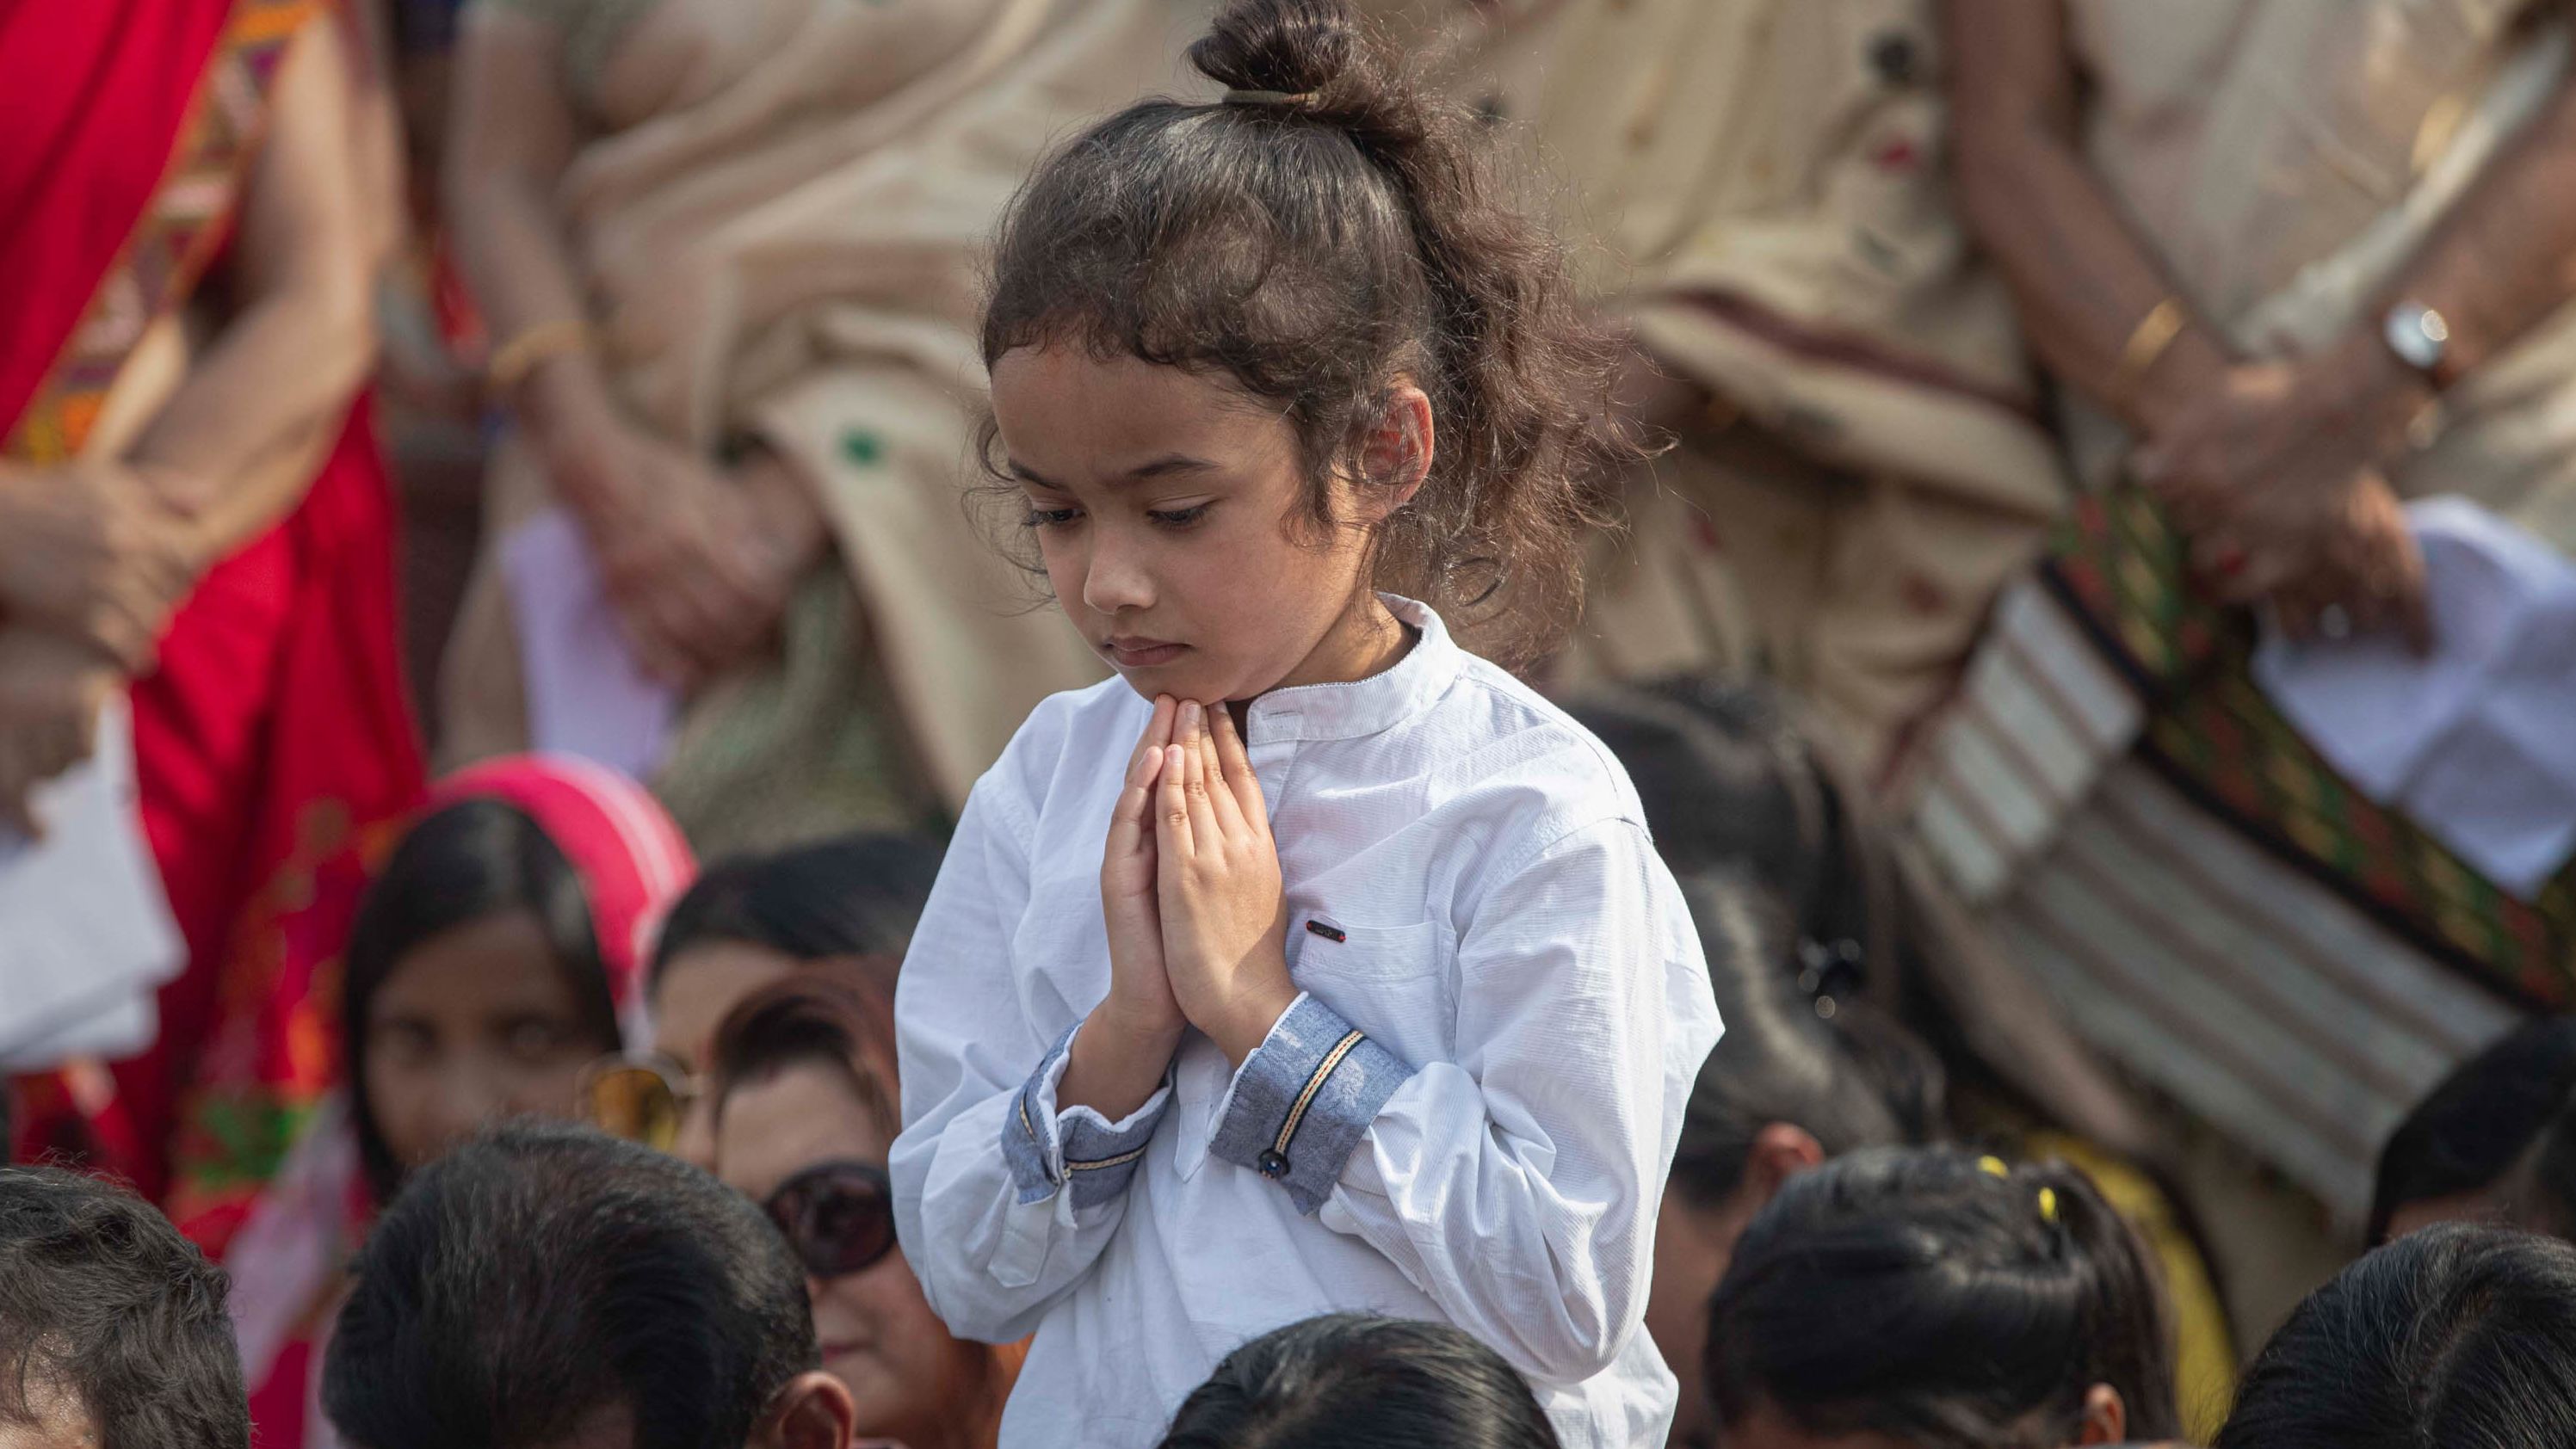 A child prays during a condolence event in Guwahati, India, for demonstrators killed in anti-CAB protests.